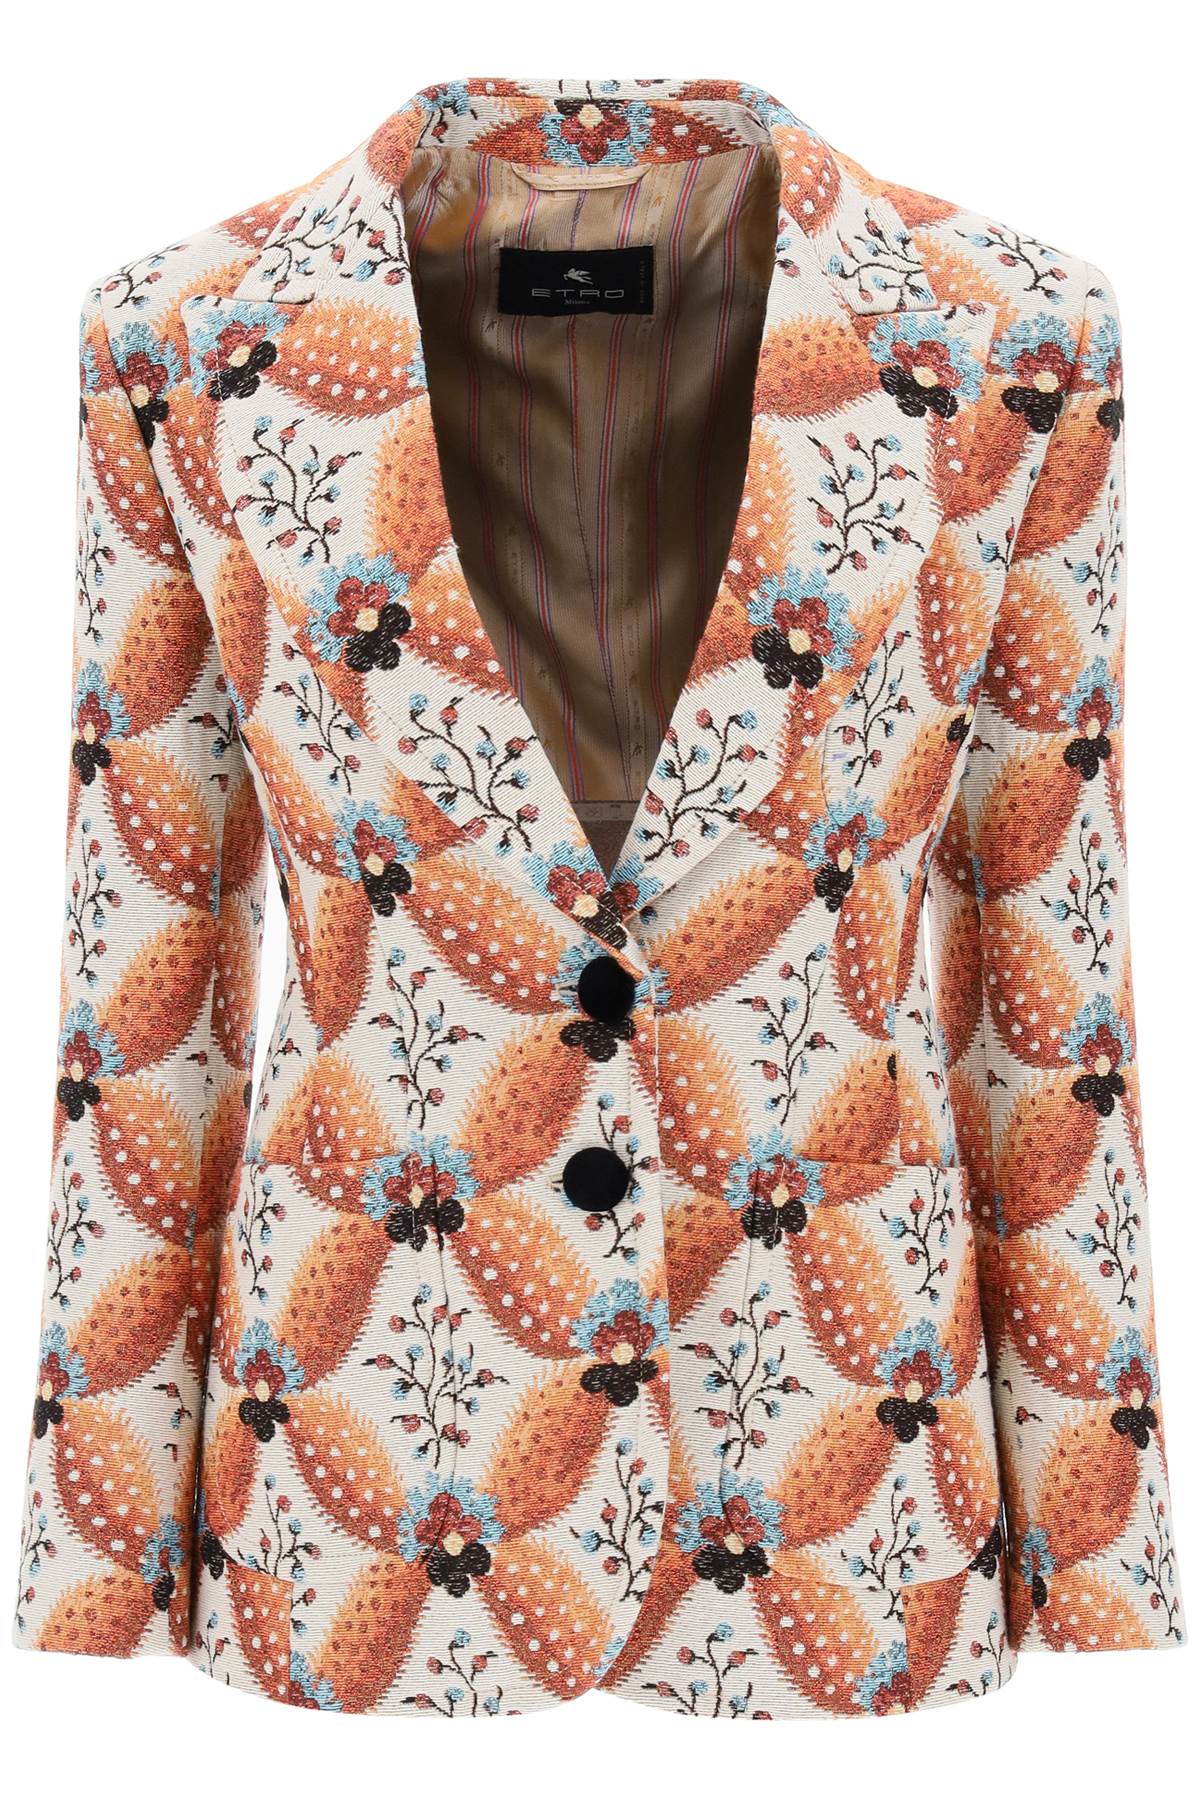 Etro Luxurious Floral Jacquard Jacket For Women In Brown